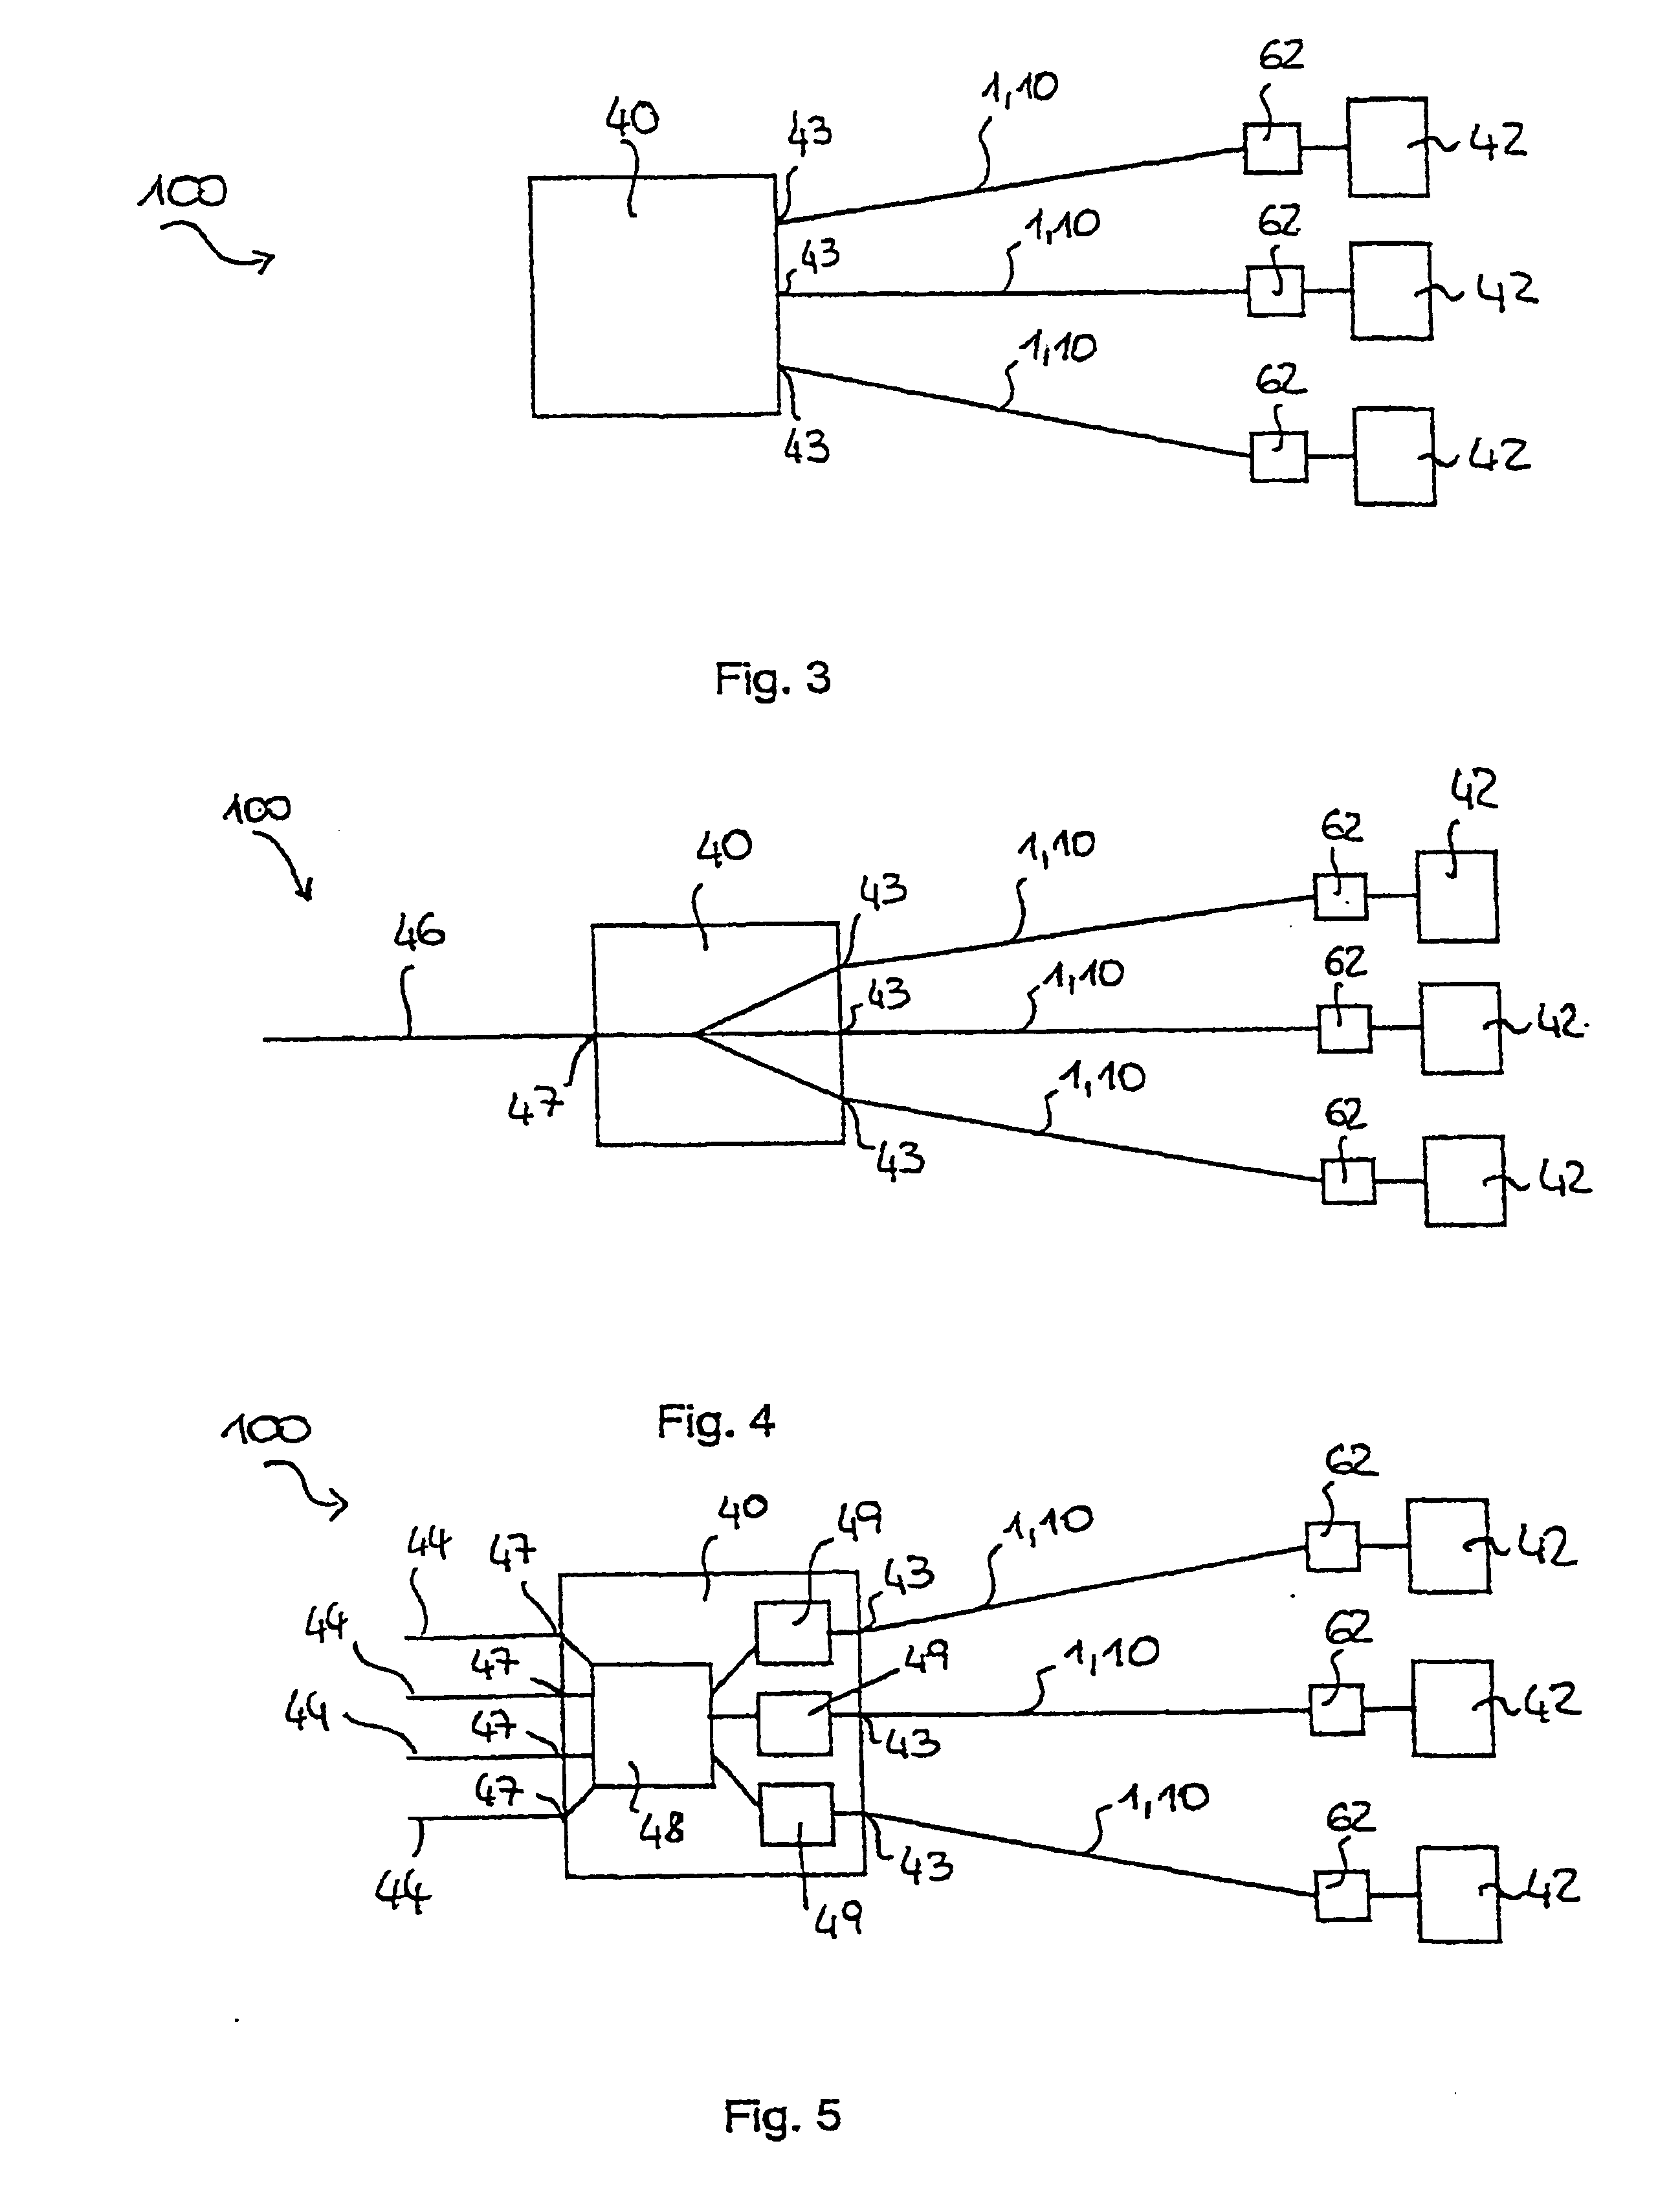 Network for distributing signals to a plurality of user equipment